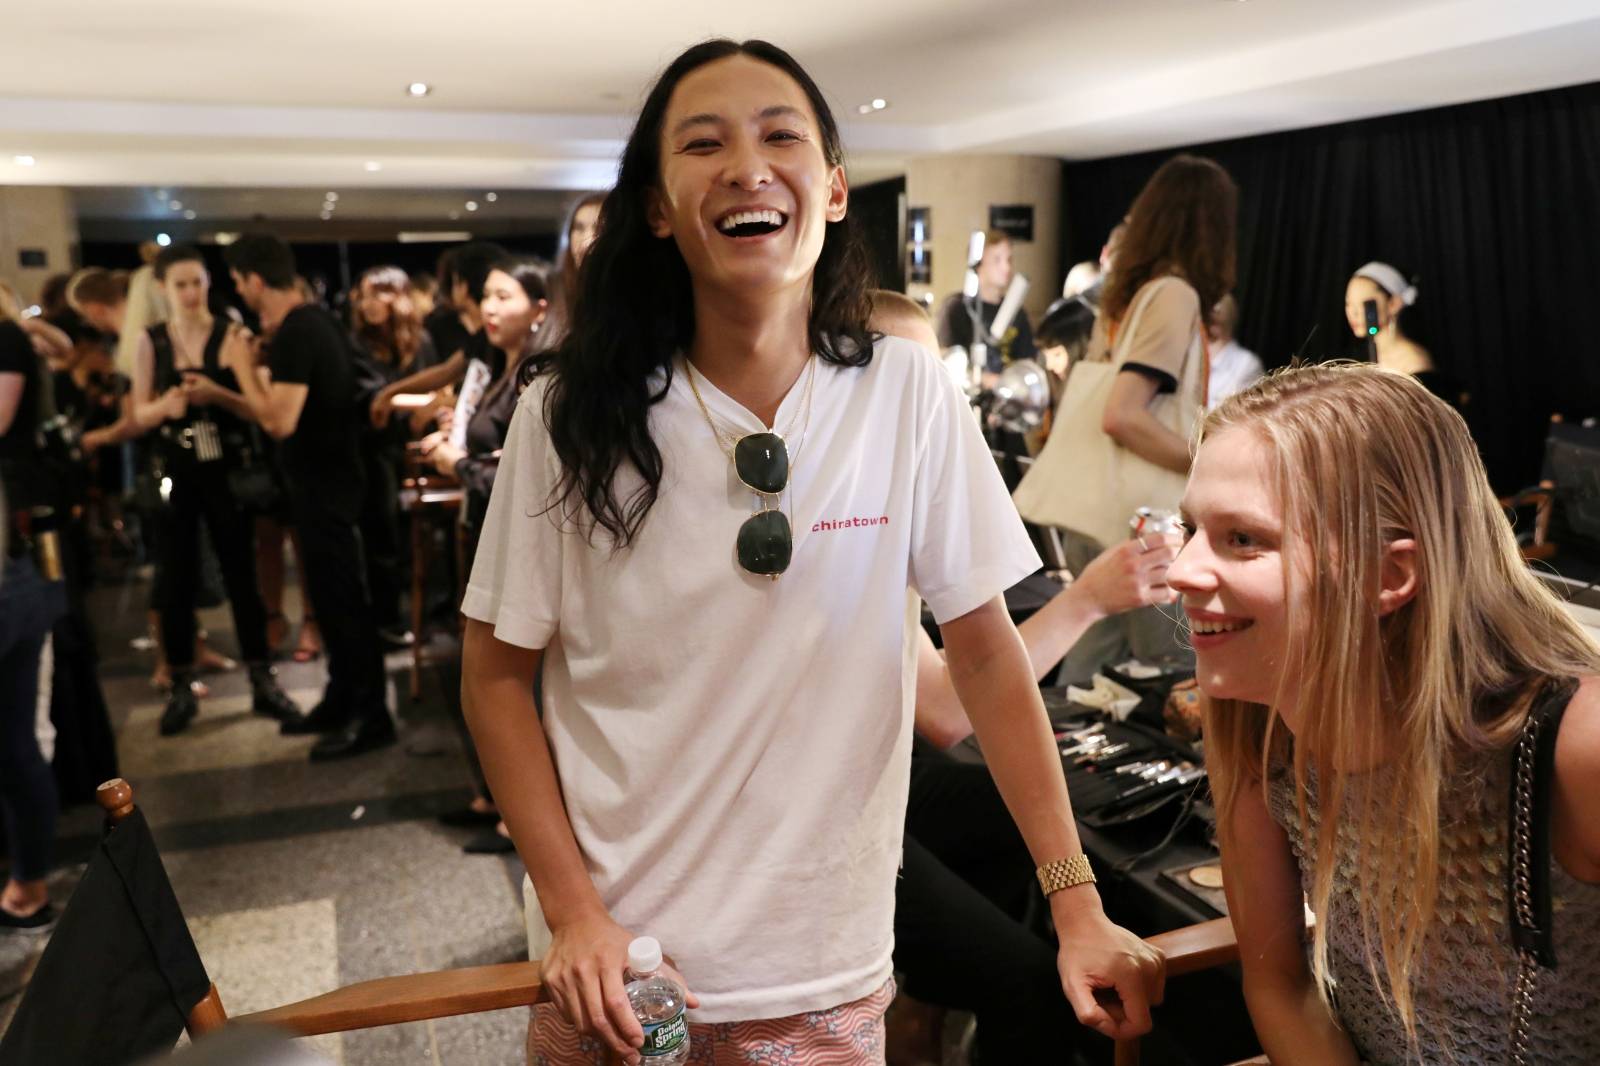 Alexander Wang's "AW Collection 1" at the Rockefeller Center in New York